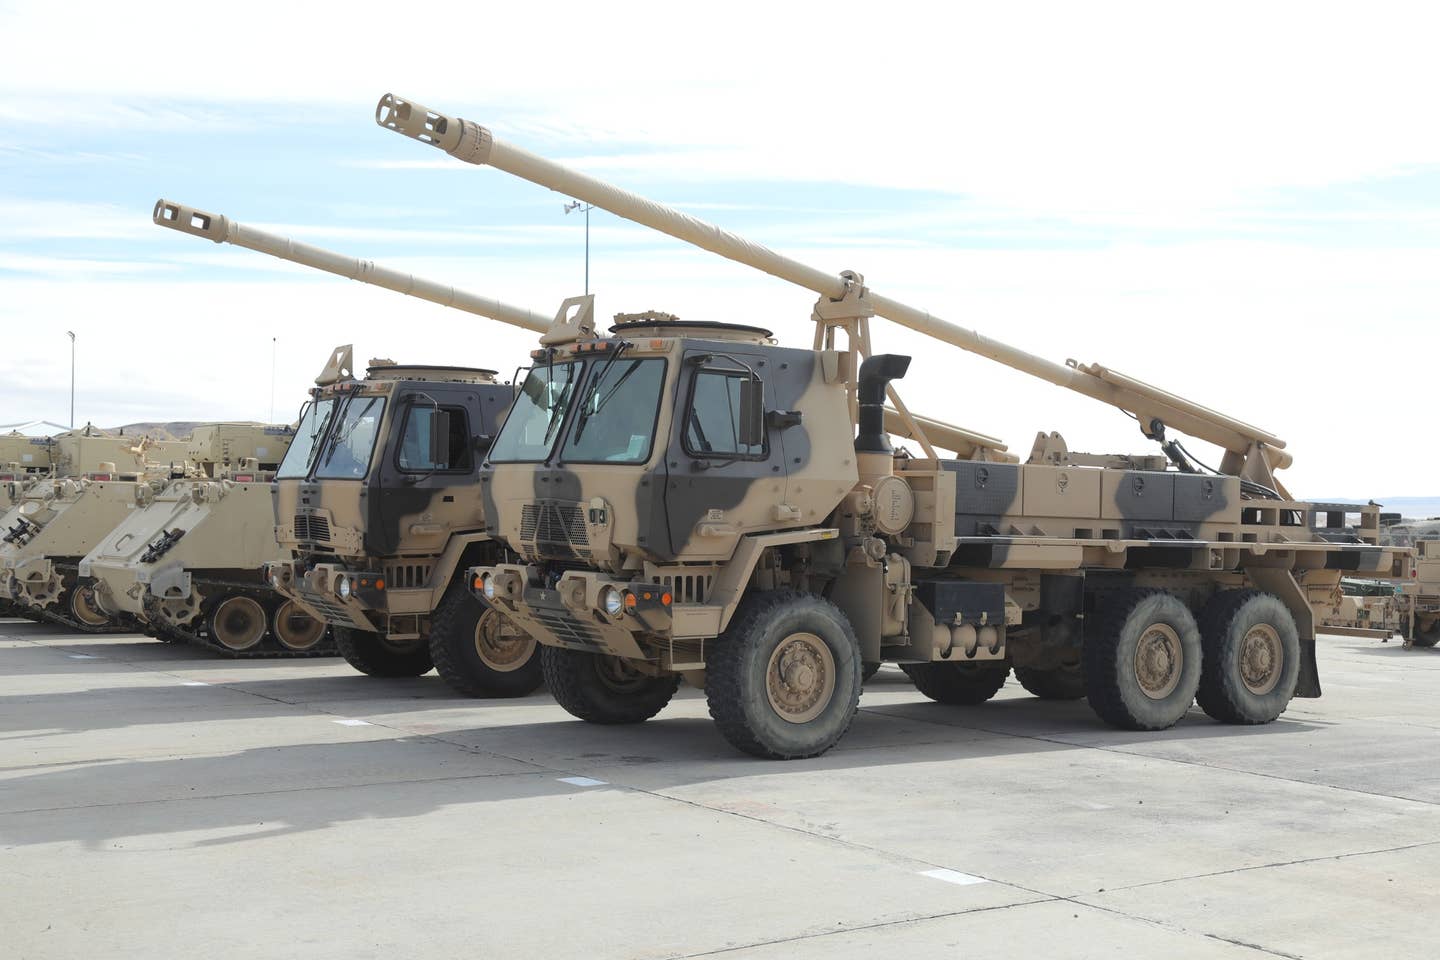 An Army FMTV-series 6x6 truck meant to emulate a French CEASAR self-propelled howitzer. <em>Credit: 11th Armored Cavalry Regiment</em>